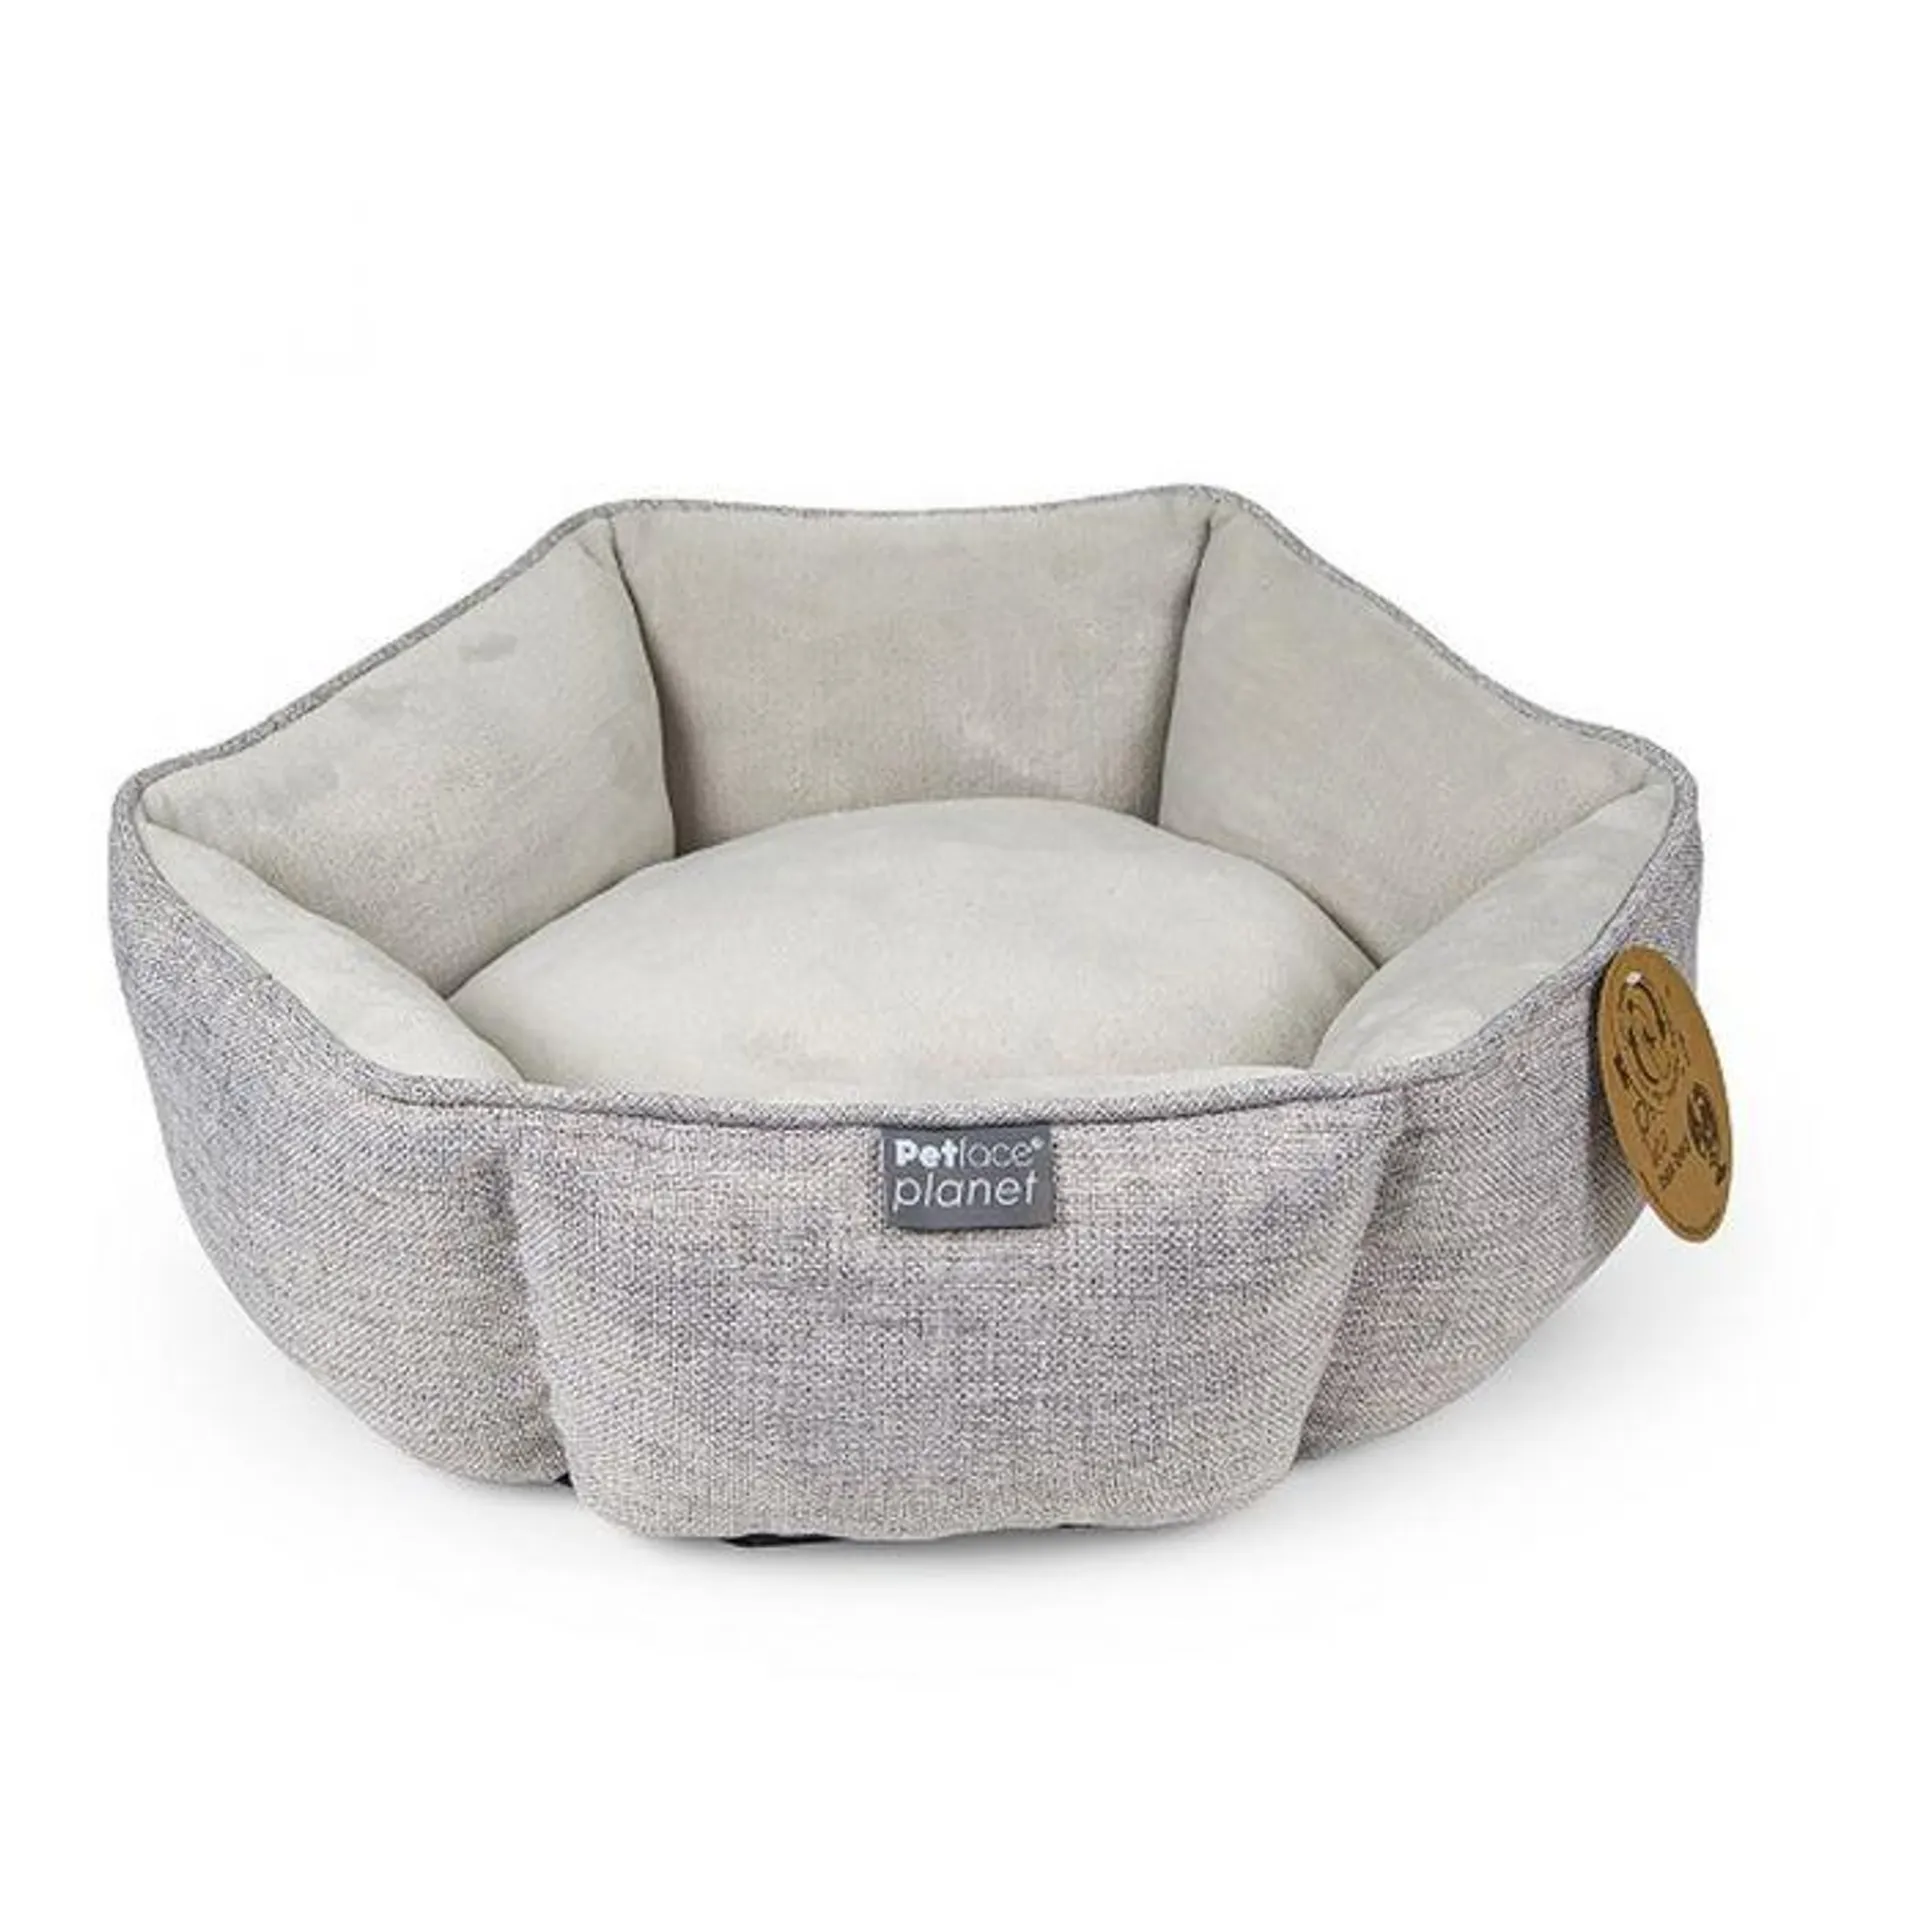 Petface Planet Eco Dog Bed - Small